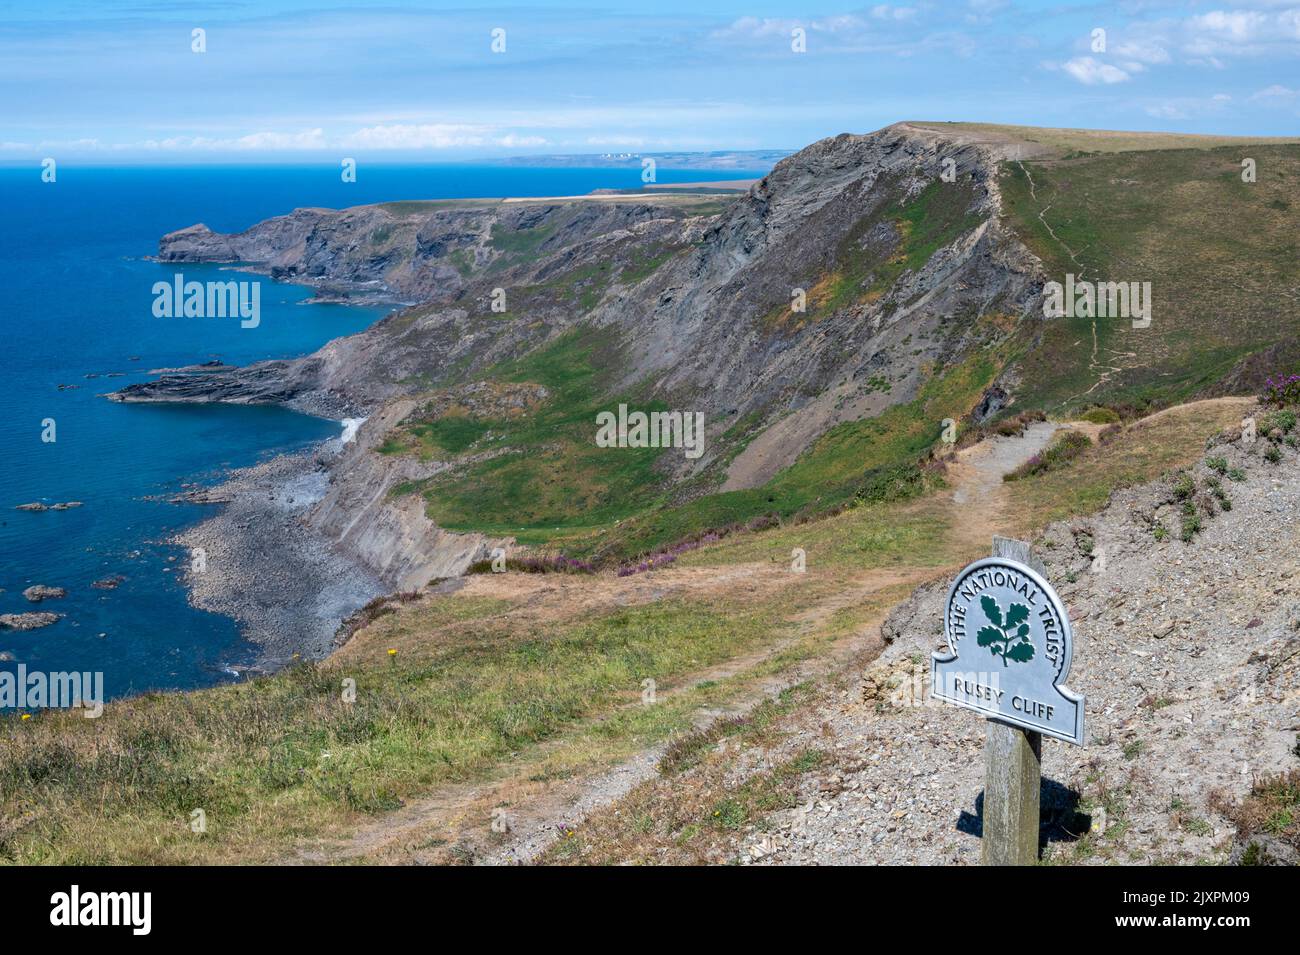 South West Coast Path, North Cornwall, with a view of Cambeak,The Strangles, Rusey Beach from Rusey Cliff. National Trust/ Rusey Cliff sign. Stock Photo